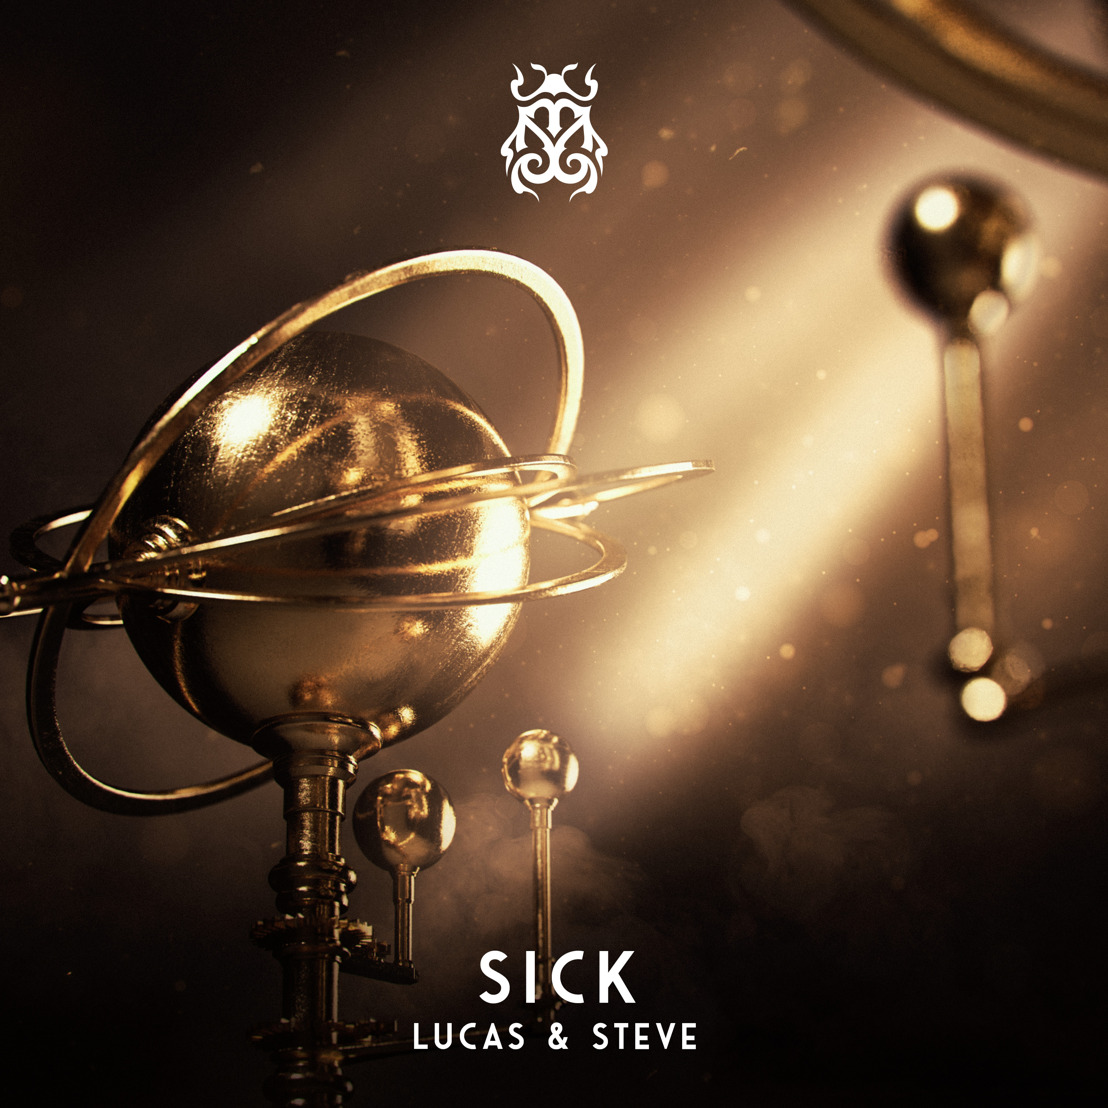 Dutch duo Lucas & Steve deliver a sizzling and infectious floor filler ‘SICK’